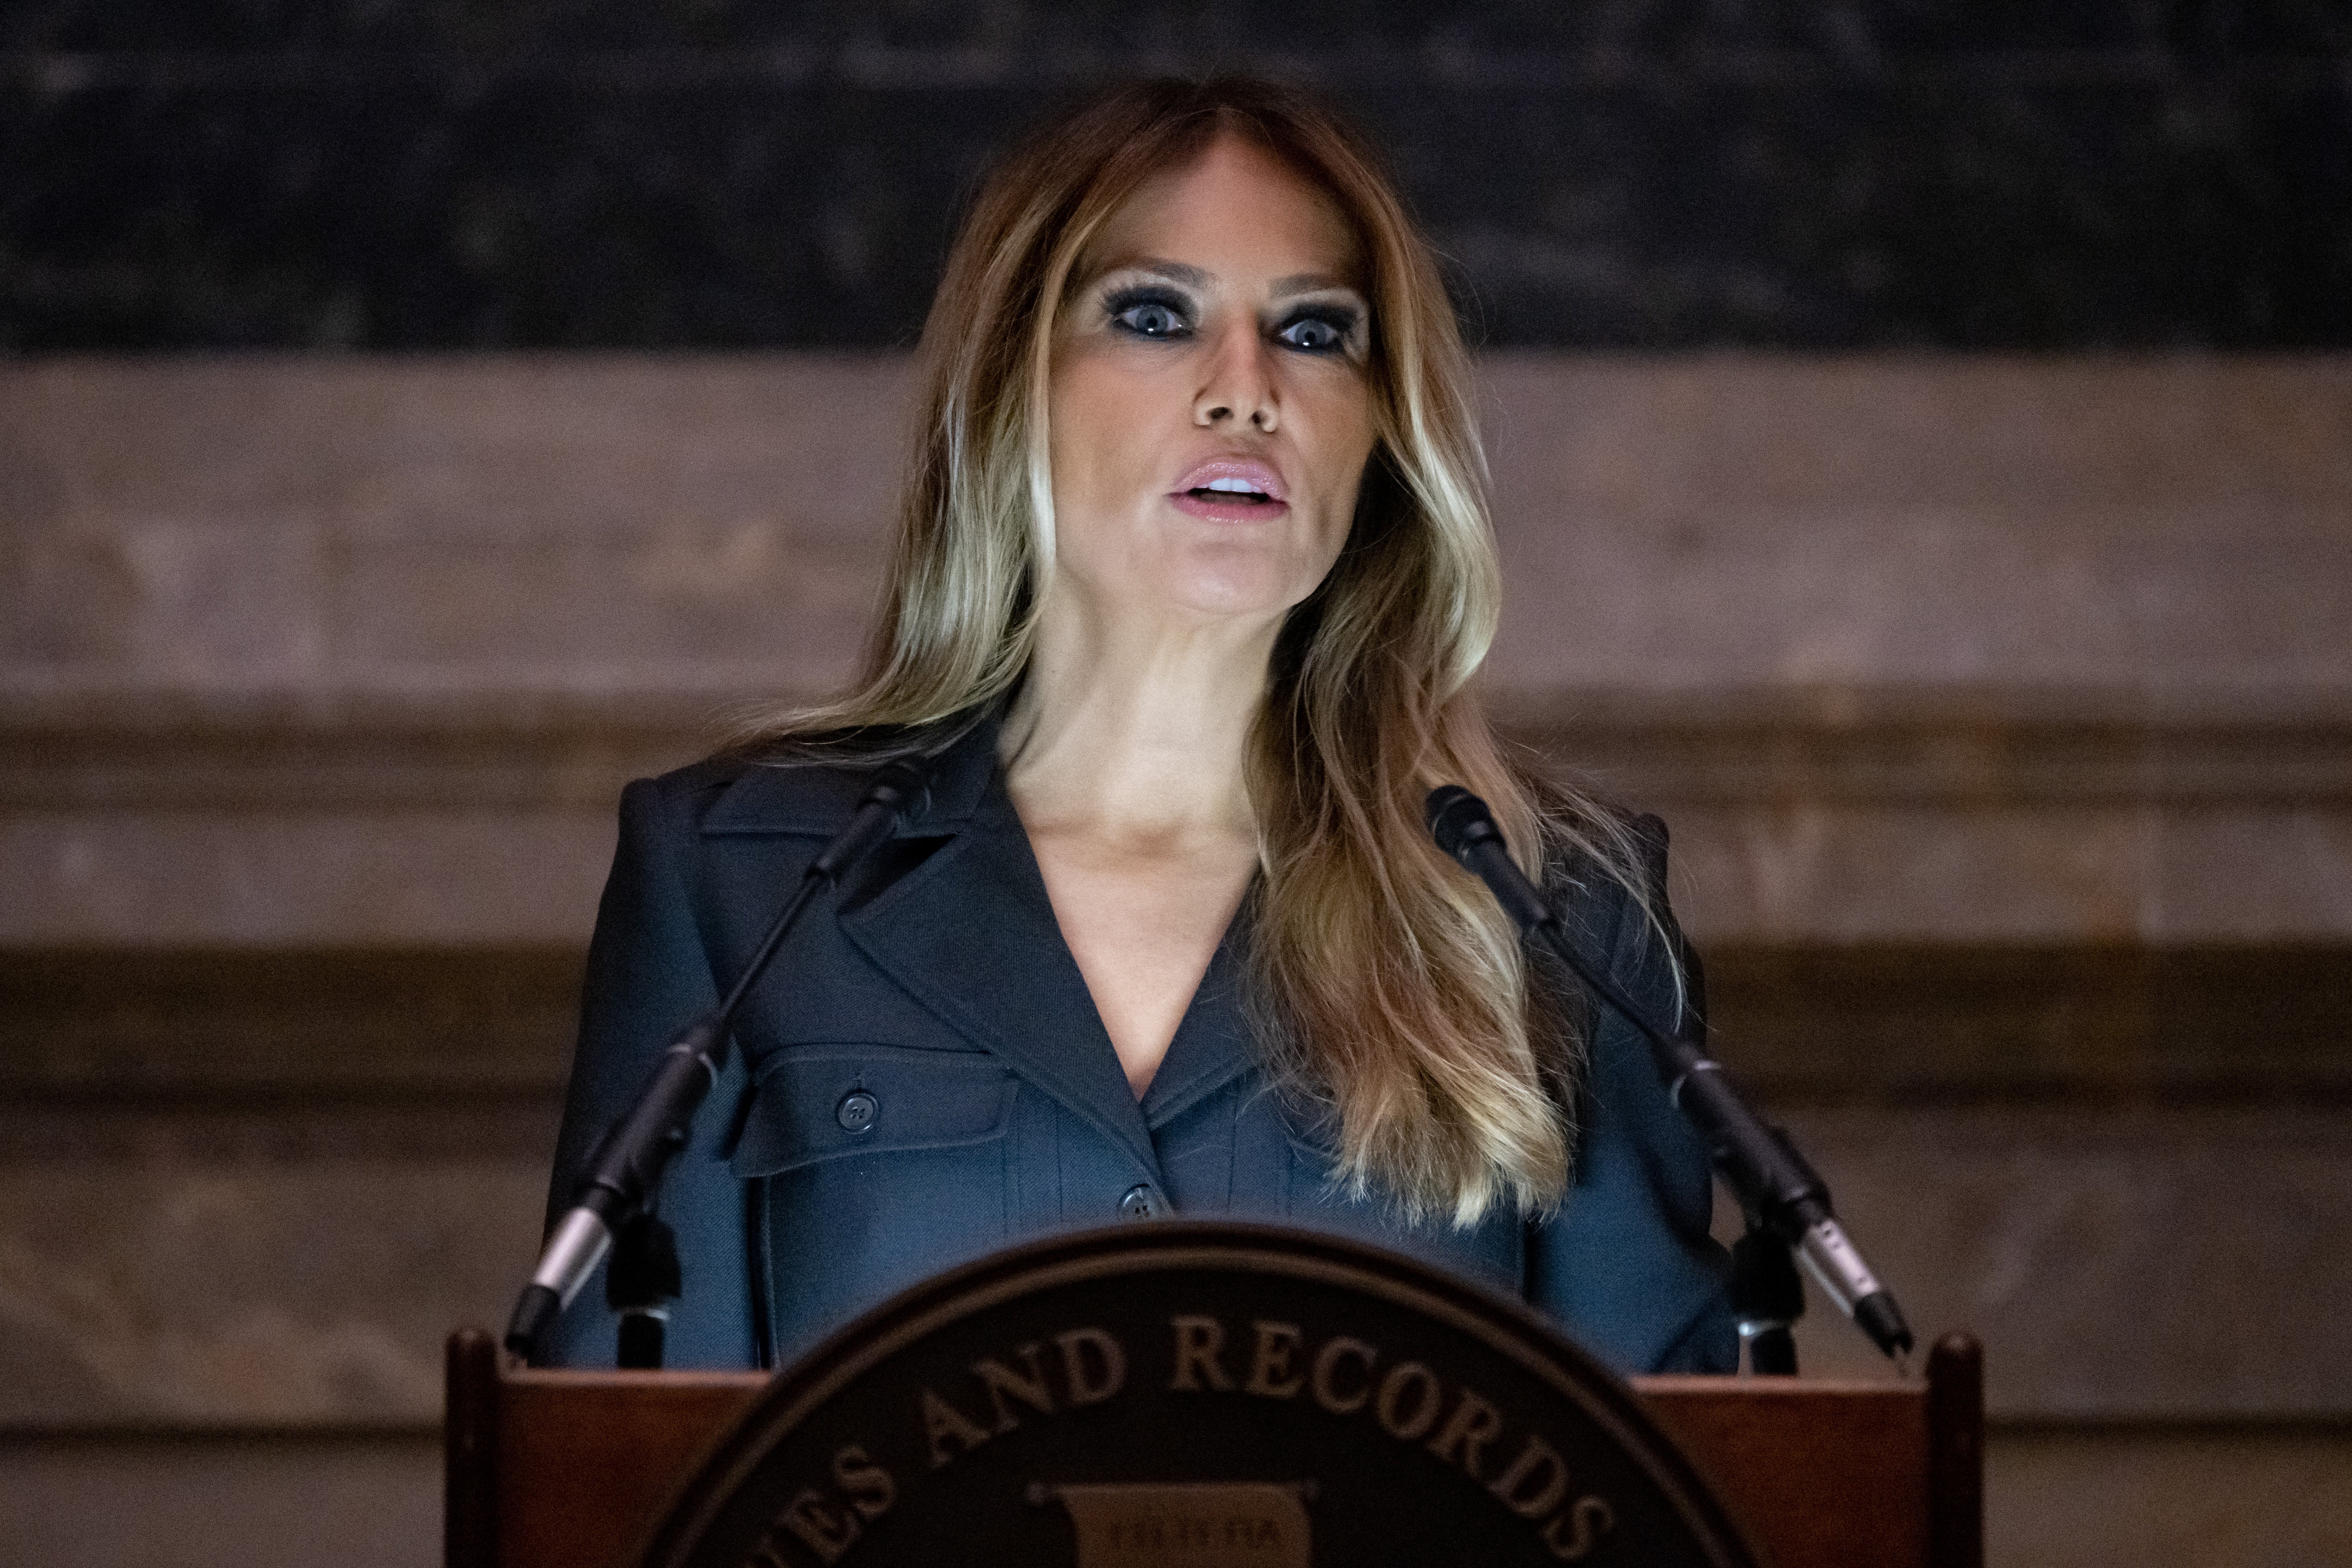 Melania Trump speaks at a naturalisation ceremony at the National Archives in Washington DC on 15 December.